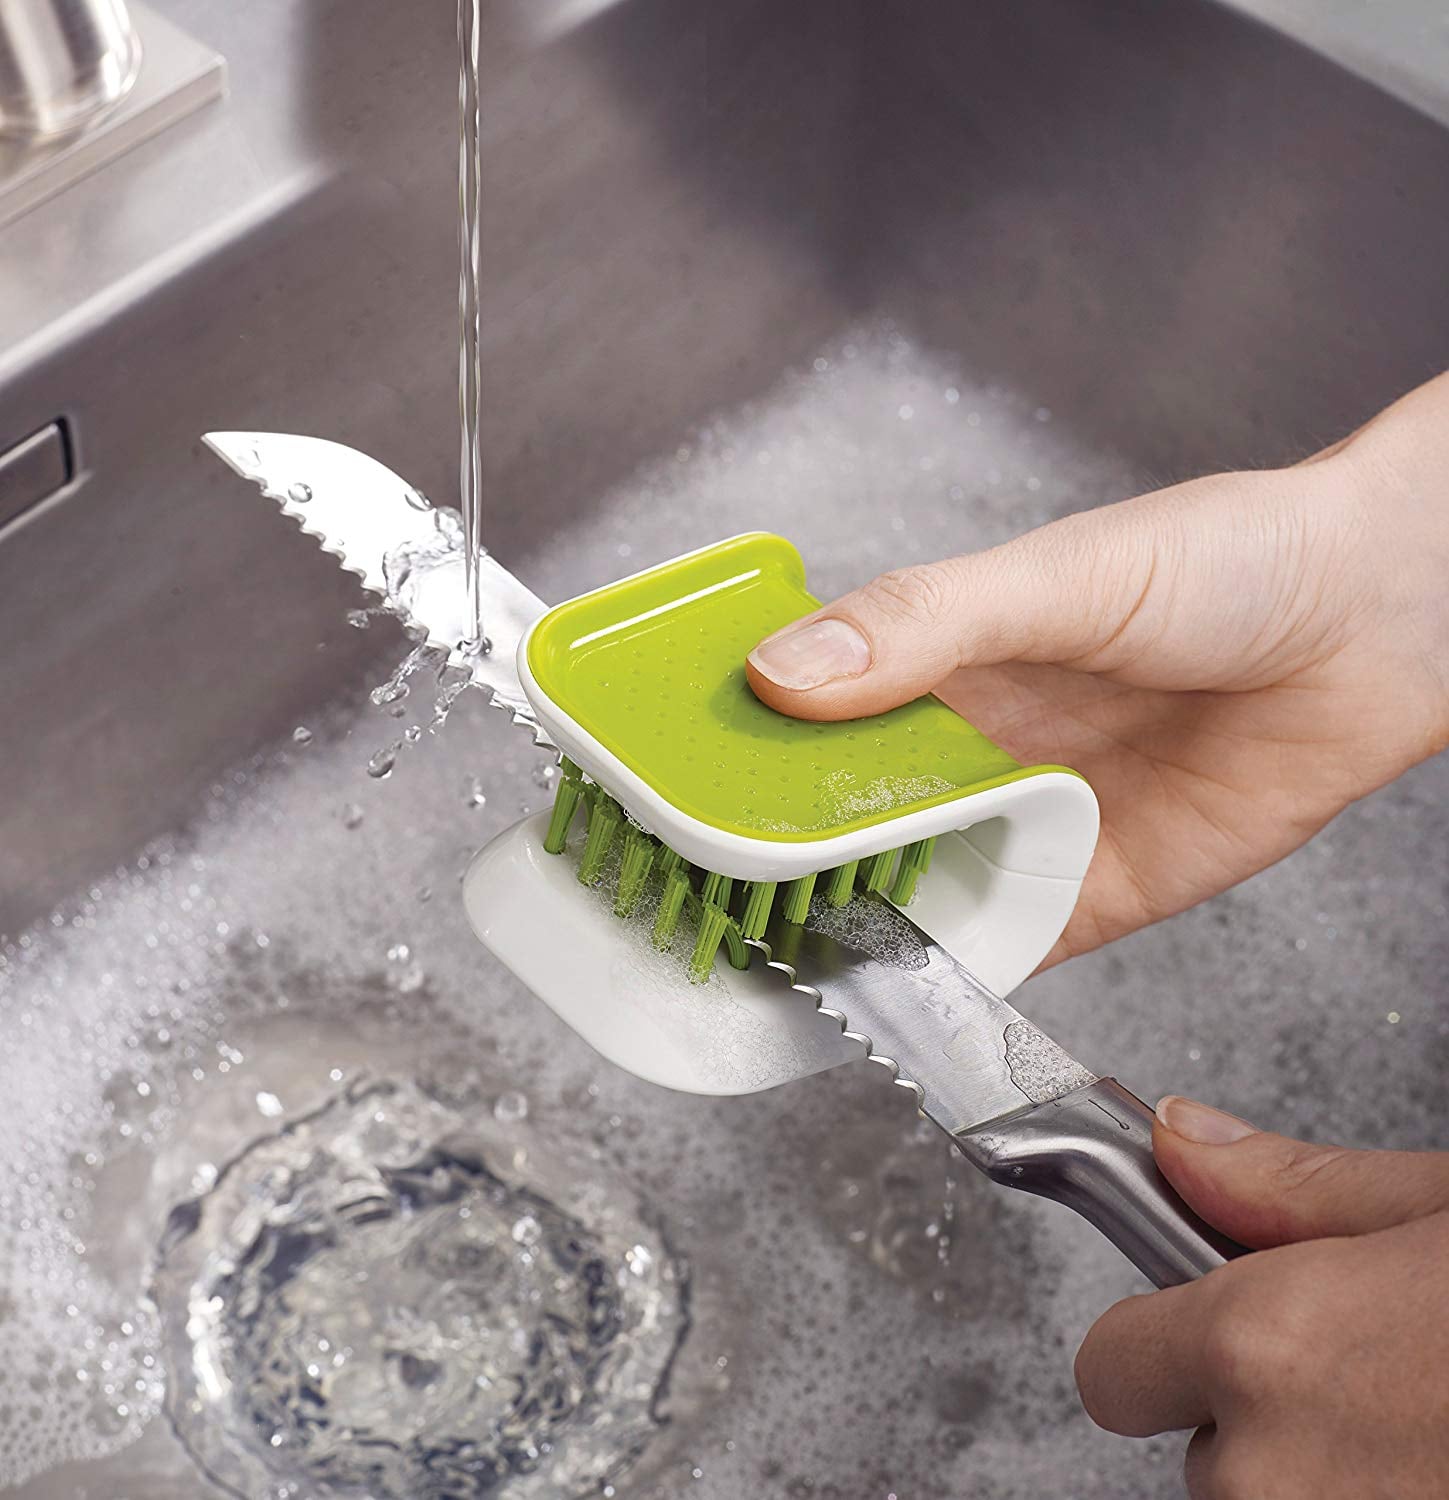 Slashed Prices on Top-Rated Cleaning Gadgets